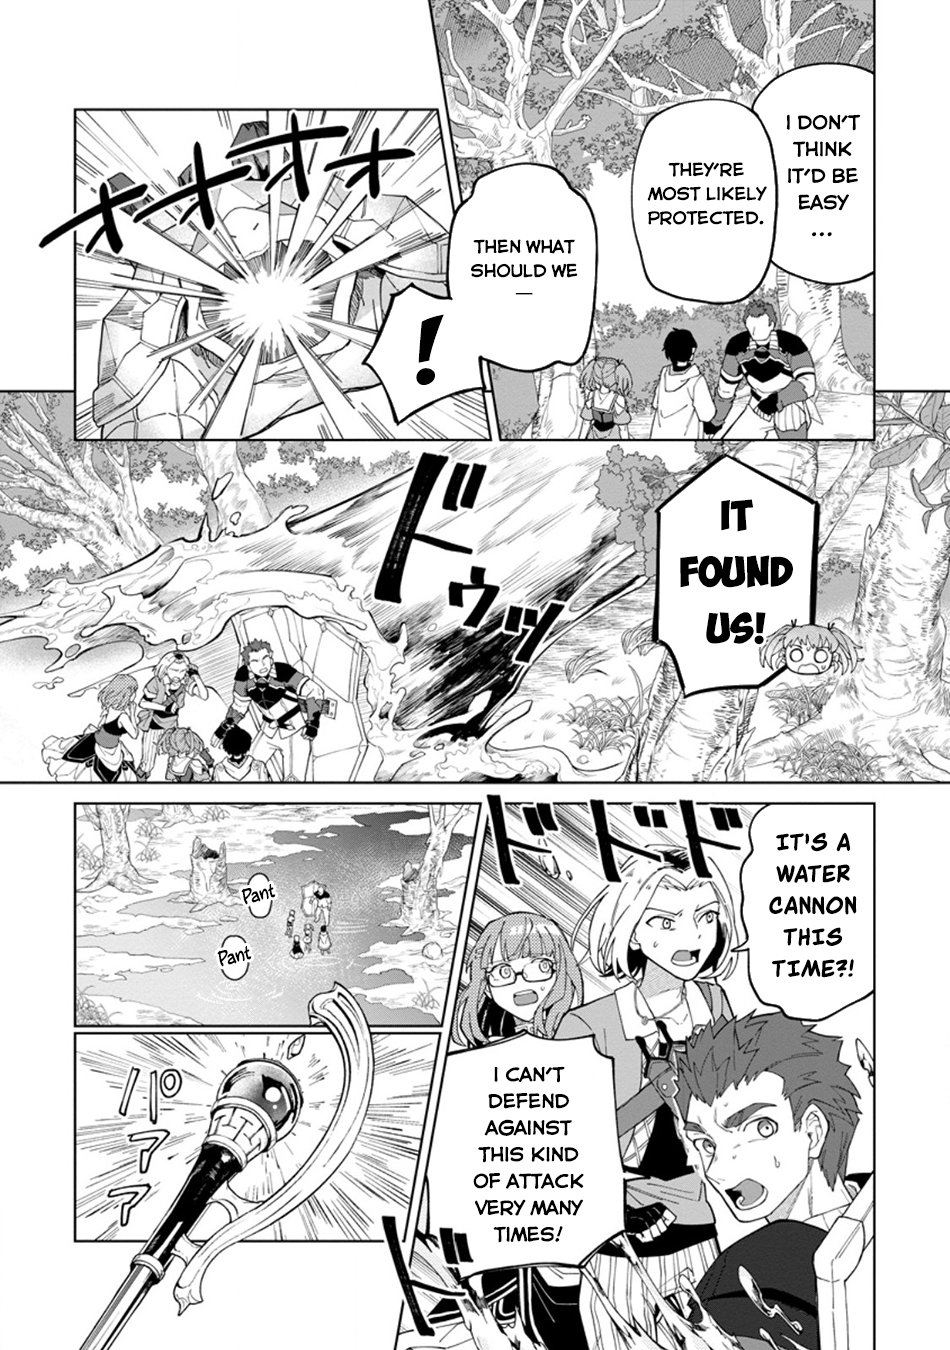 The White Mage Who Was Banished From the Hero's Party Is Picked up by an S Rank Adventurer ~ This White Mage Is Too Out of the Ordinary! Chapter 33